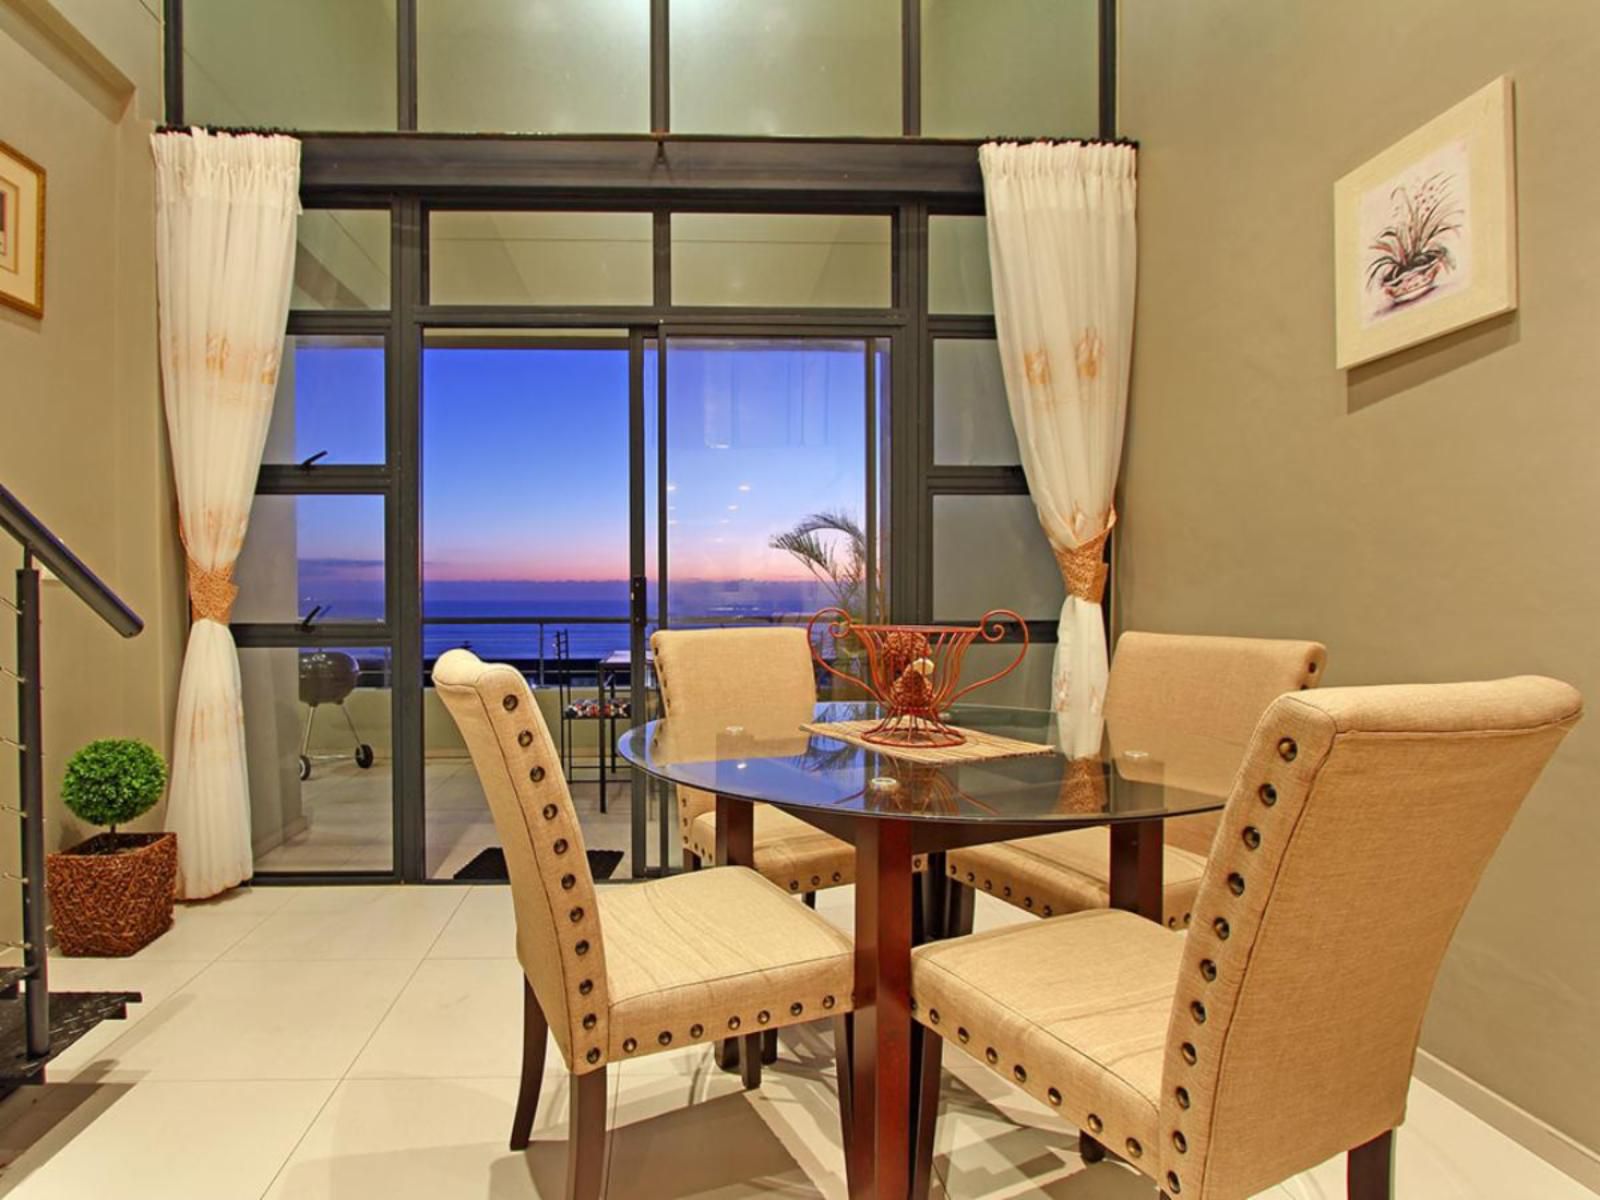 La Cabina 601 By Hostagents Table View Blouberg Western Cape South Africa Living Room